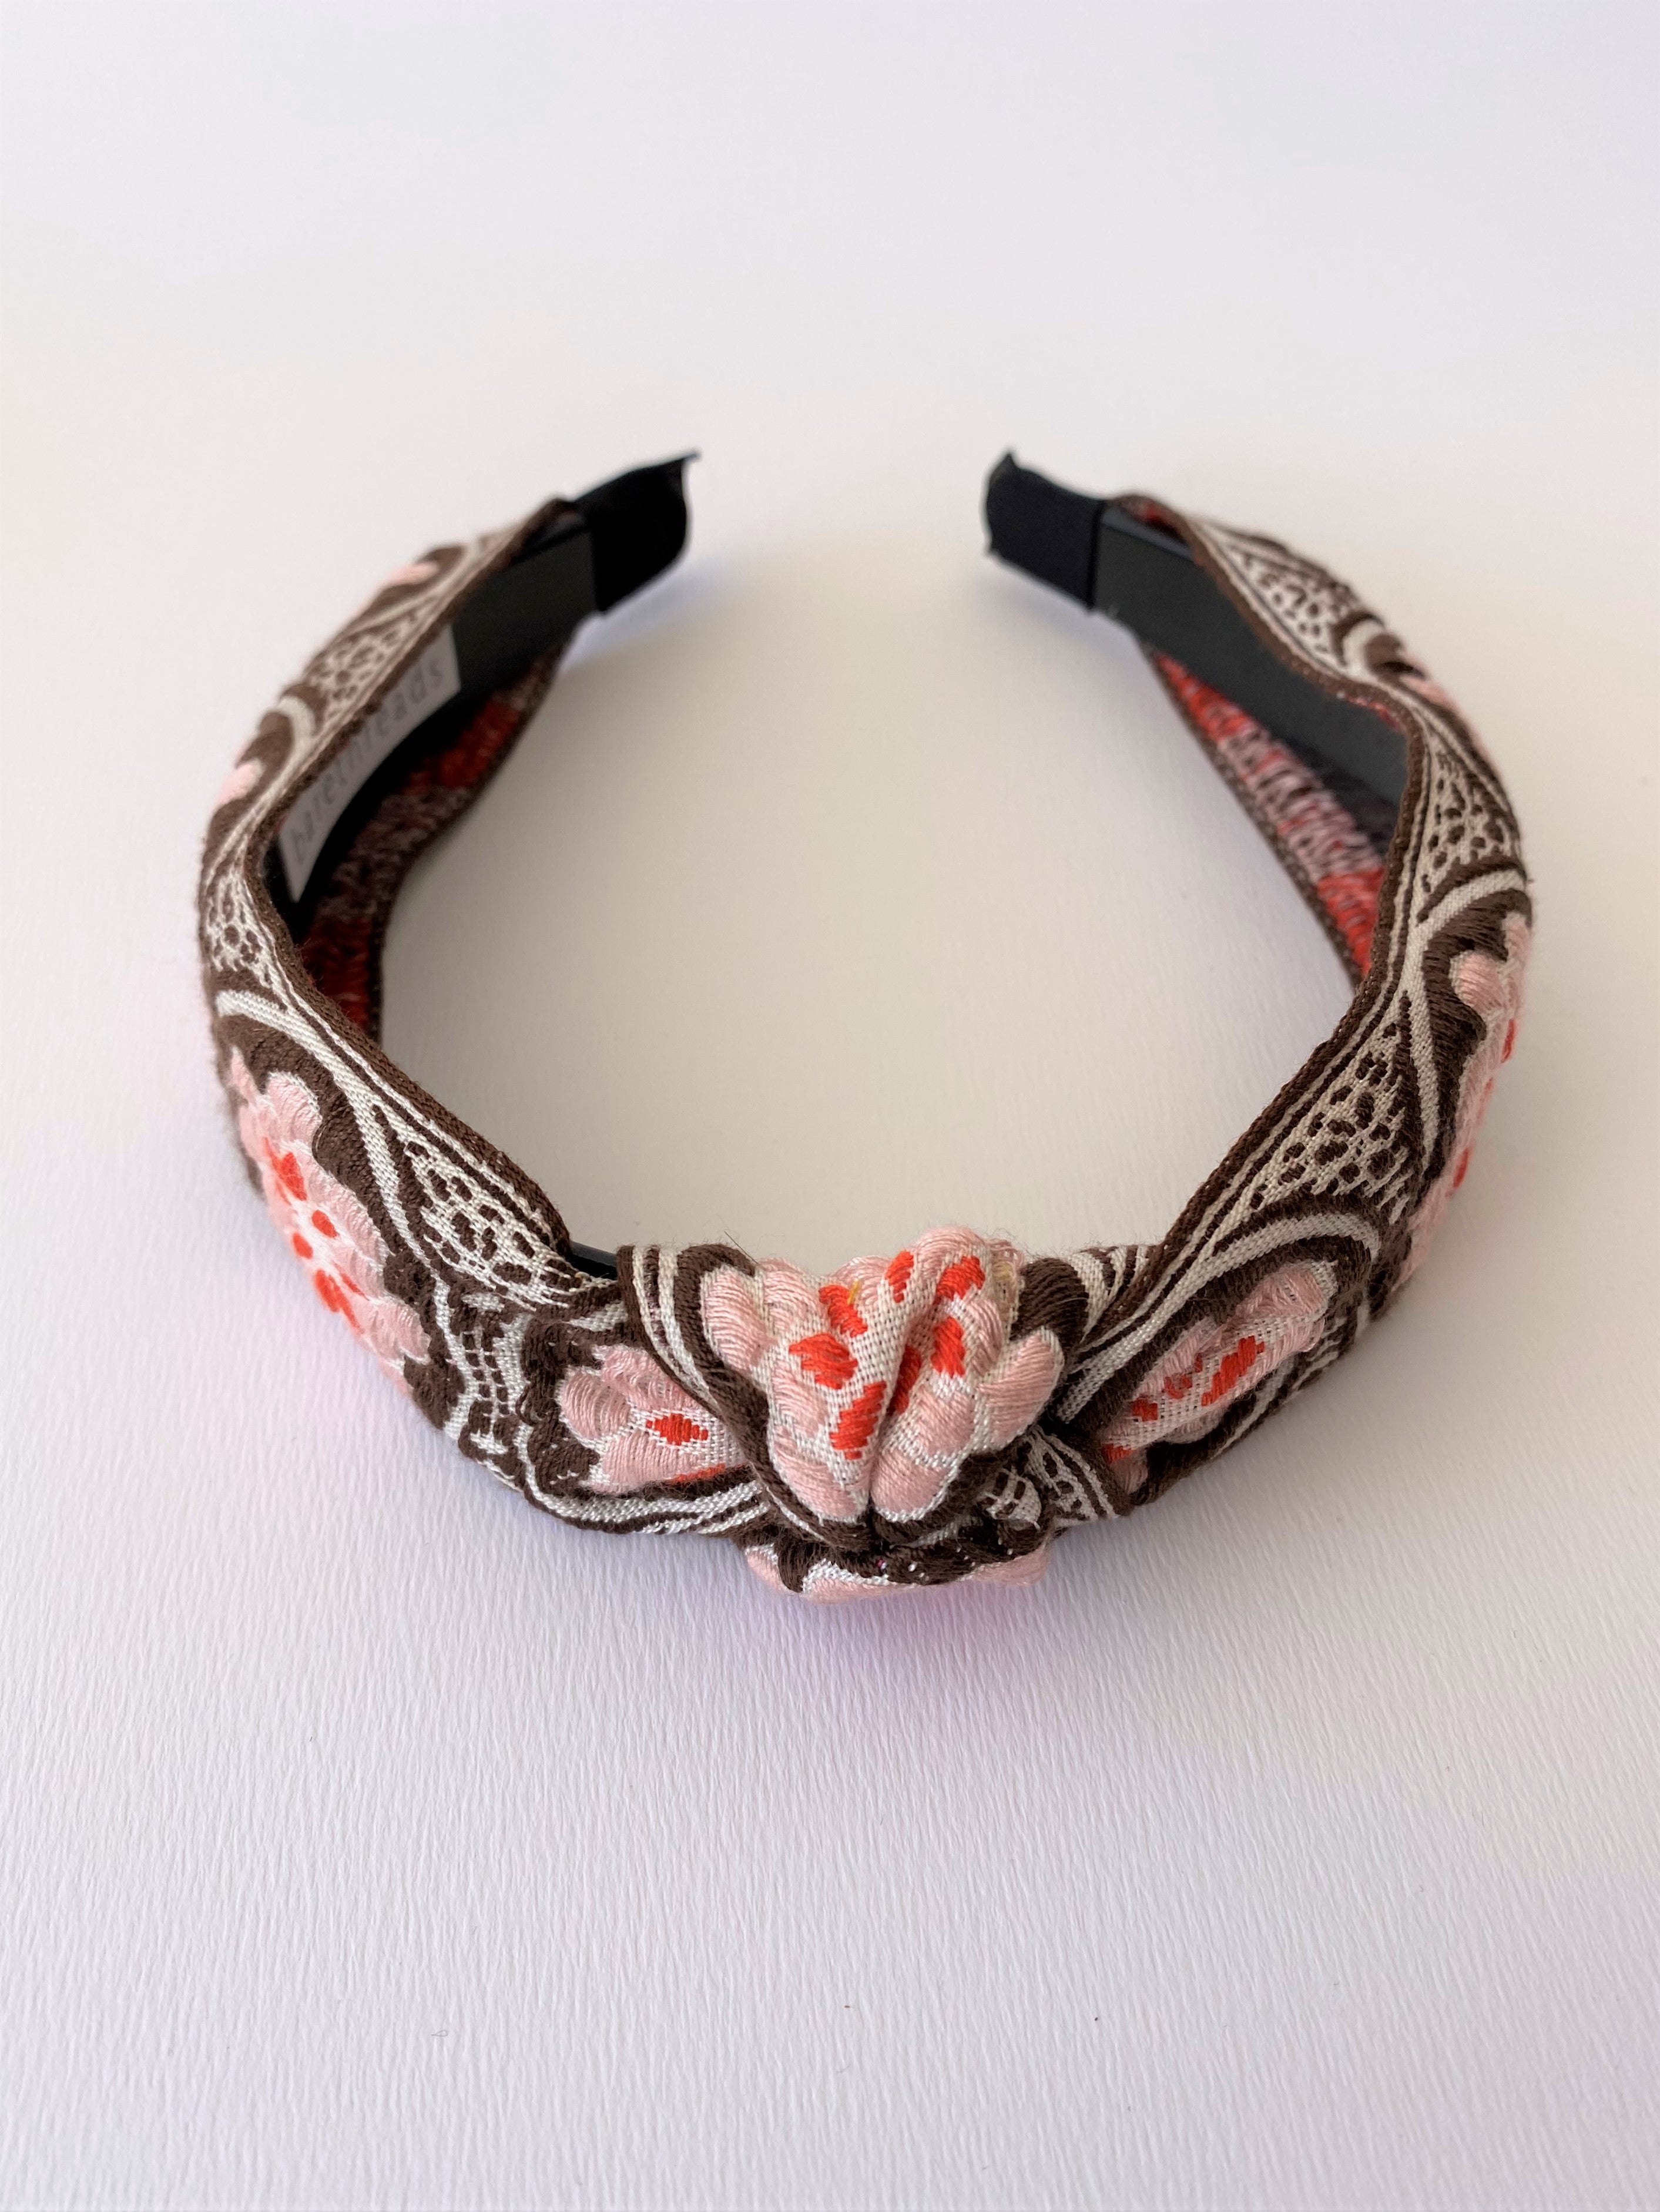 THE LOTUS EMBROIDERED BAND